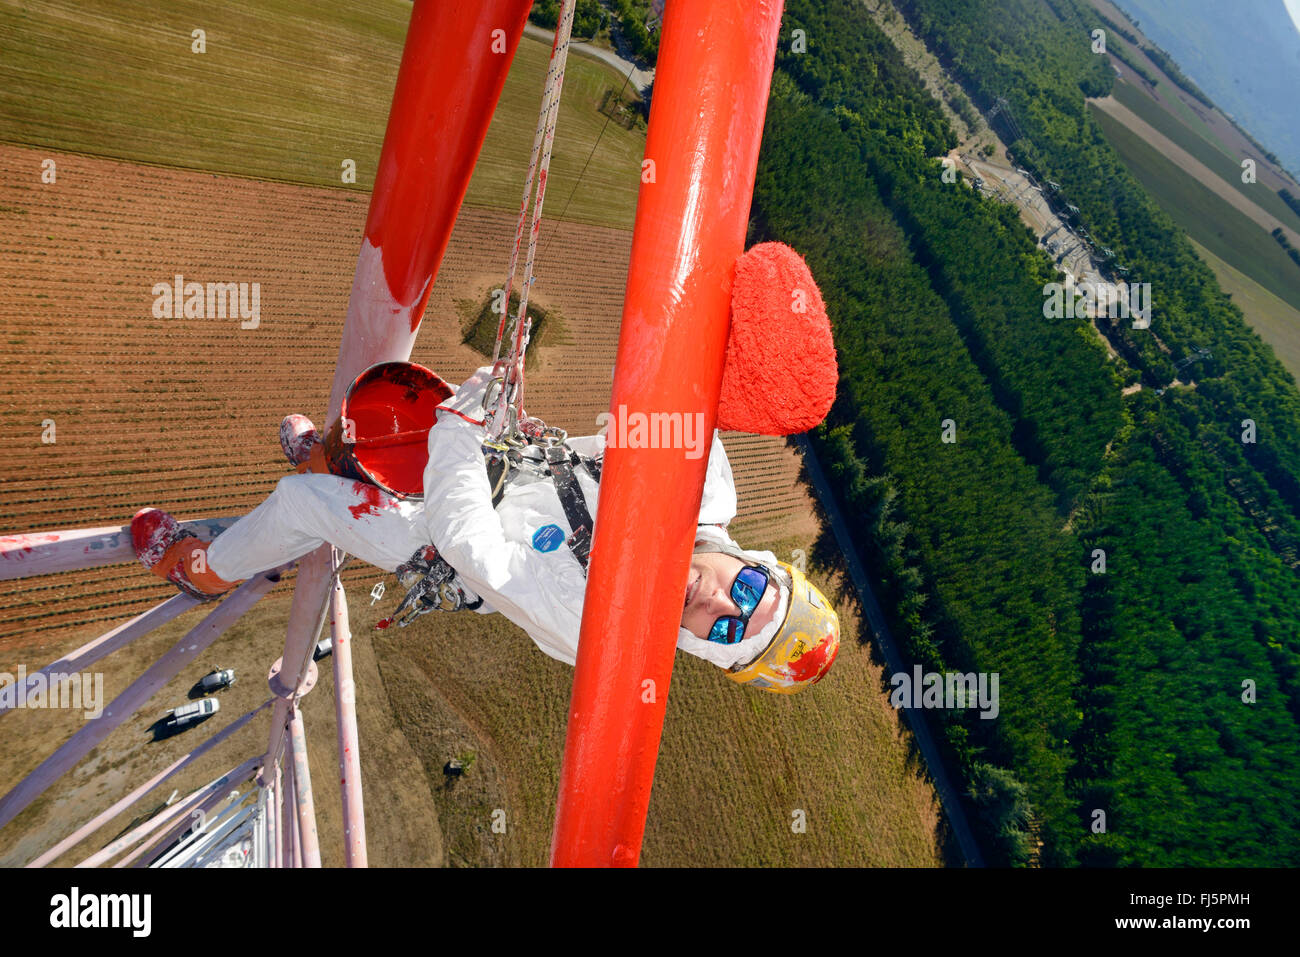 painter coating a pole in dizzy altidude, France Stock Photo